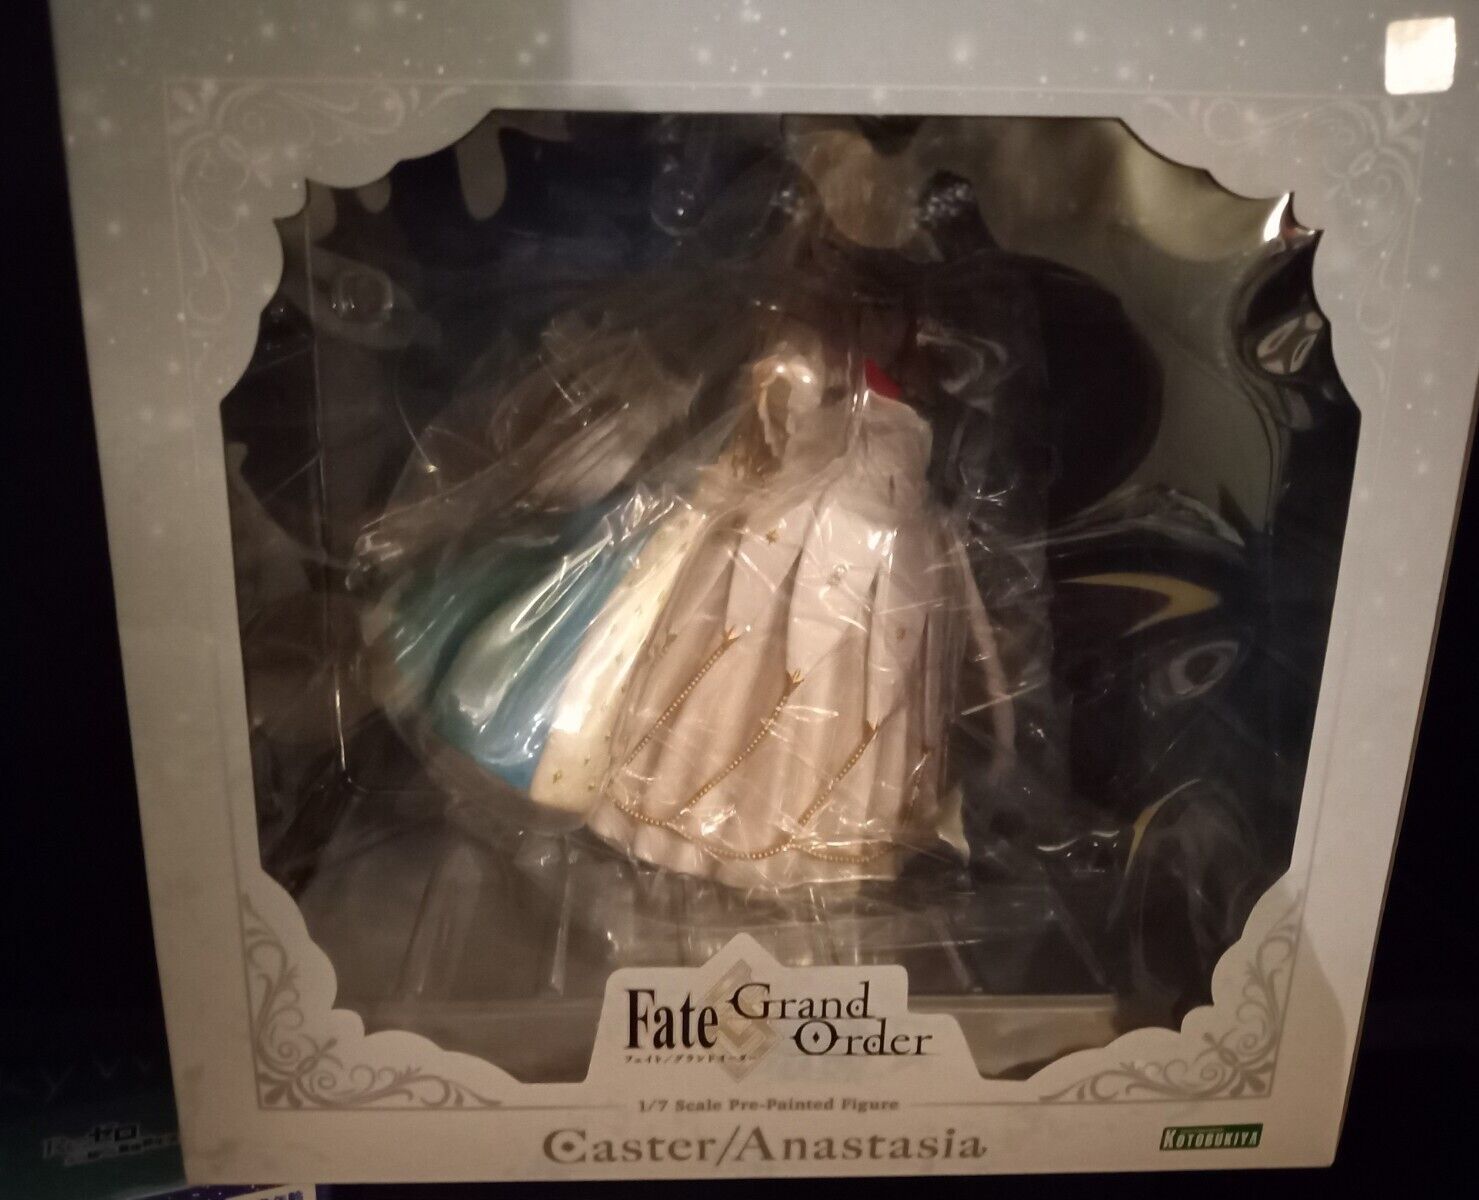 1 of 20 Tokyo Anime Expo Fate Grand Order Caster / Anastasia 1/7th Scale Statue